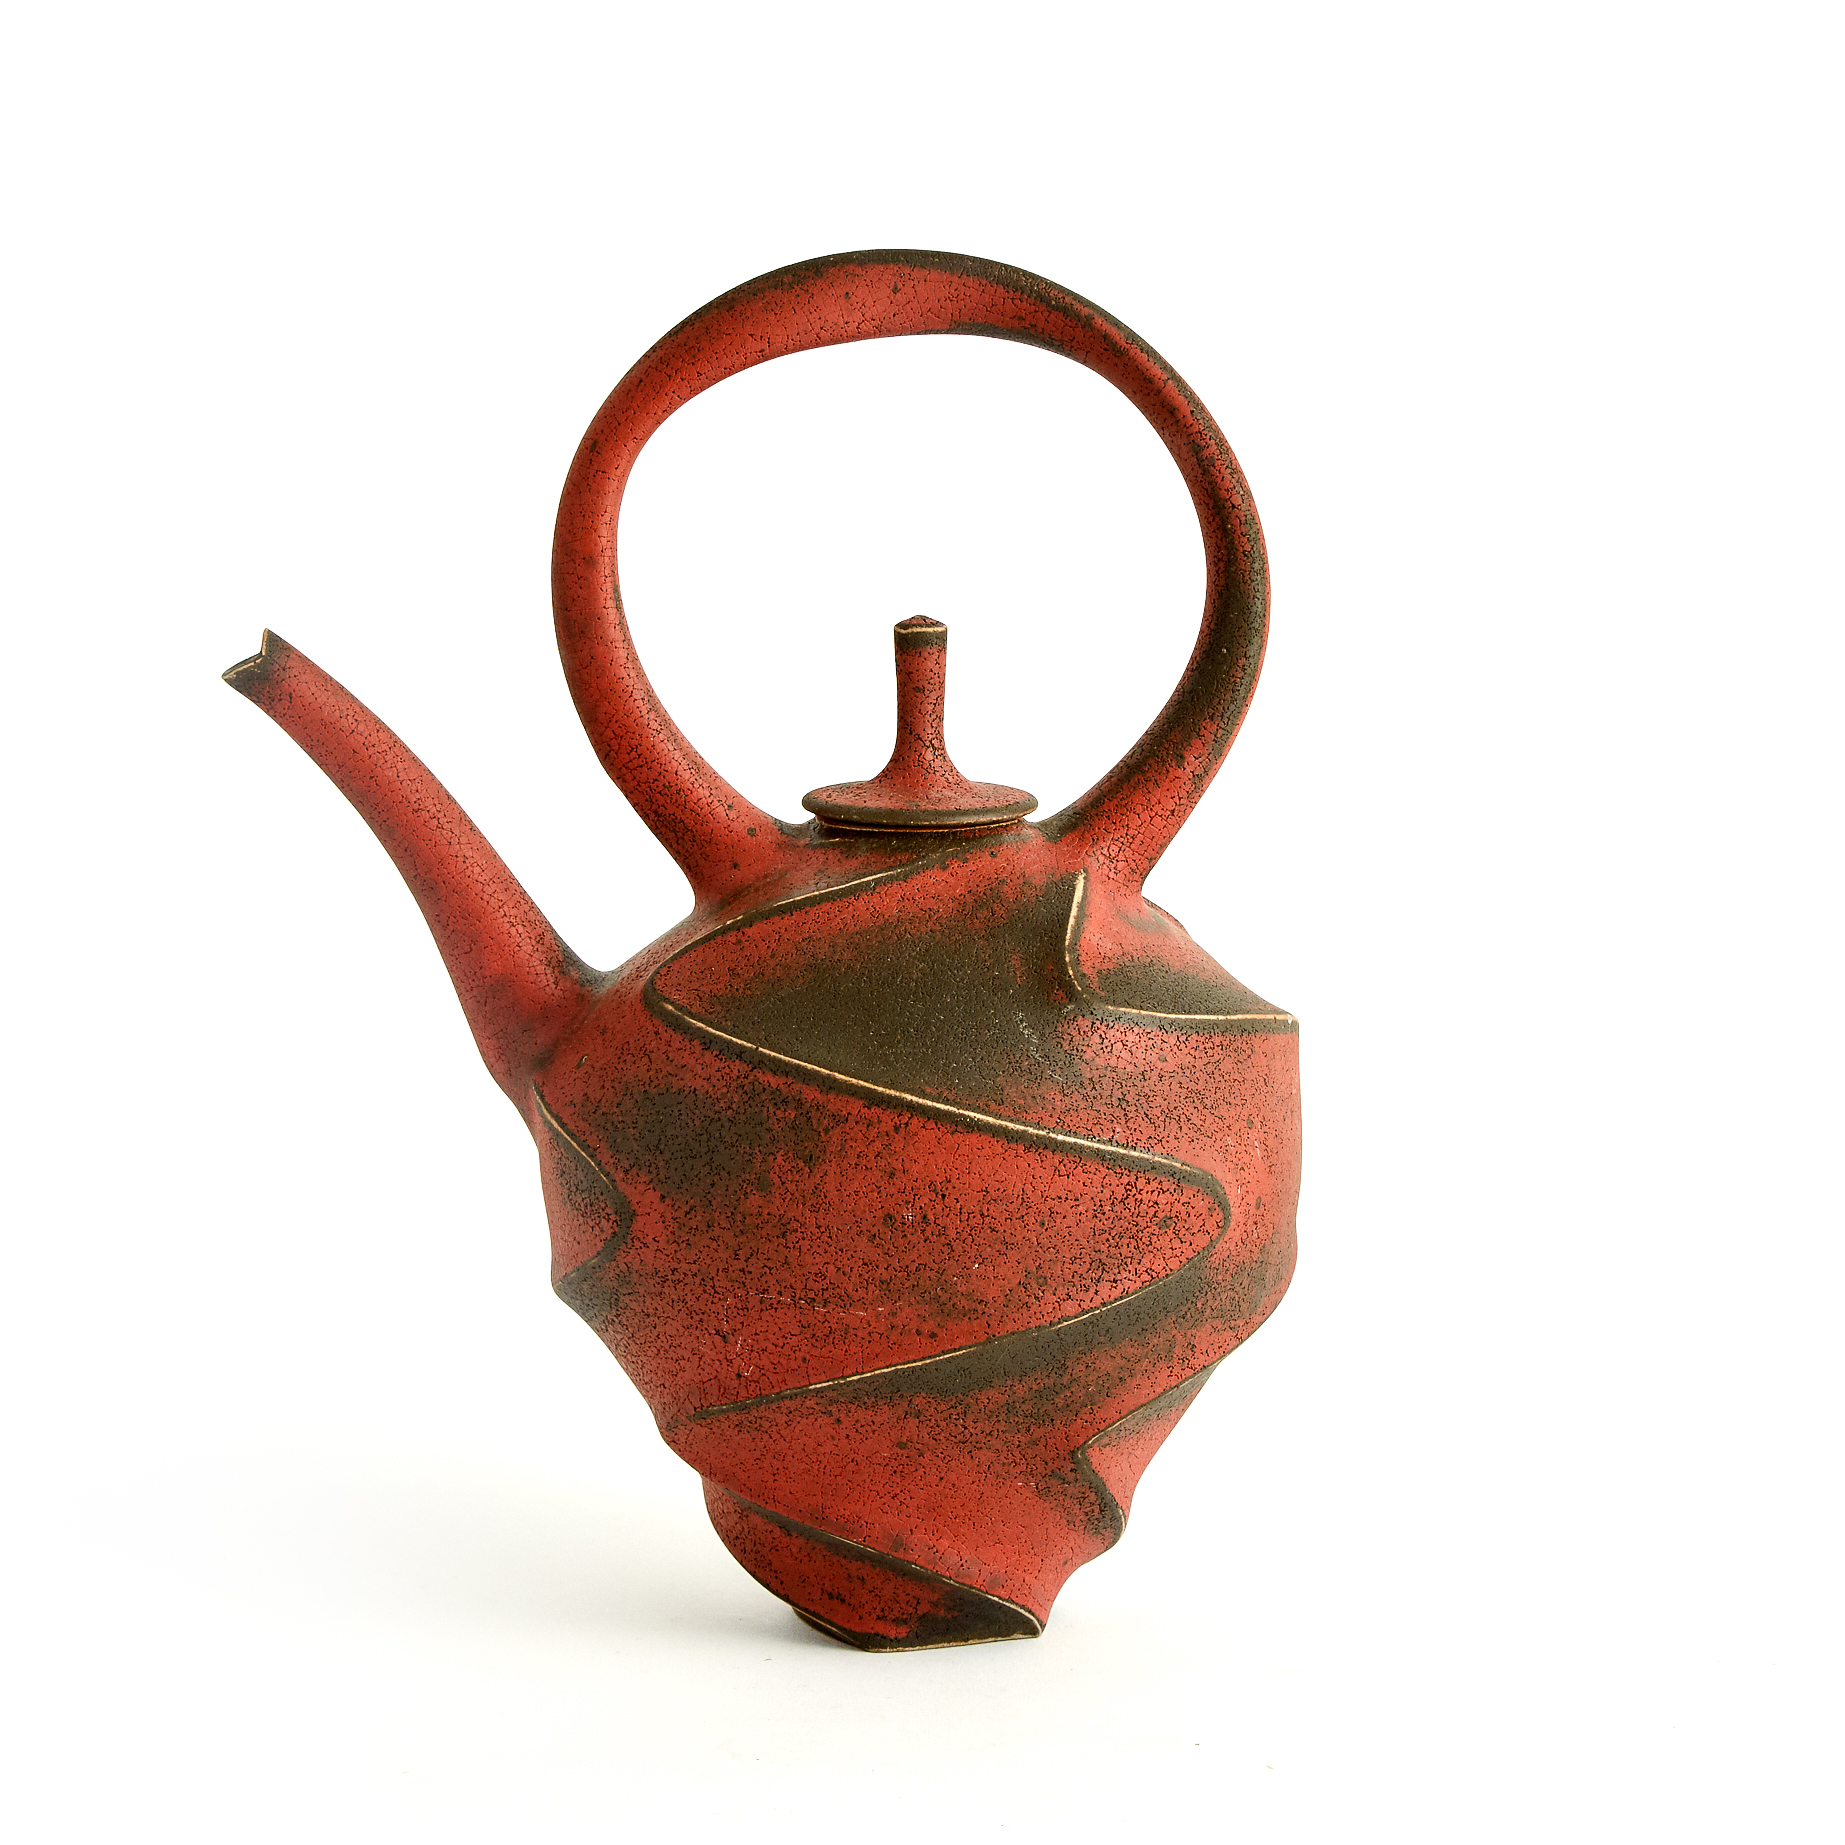 Jim Connell (American, b.1951), Red and Black Stoneware Teapot, 2008